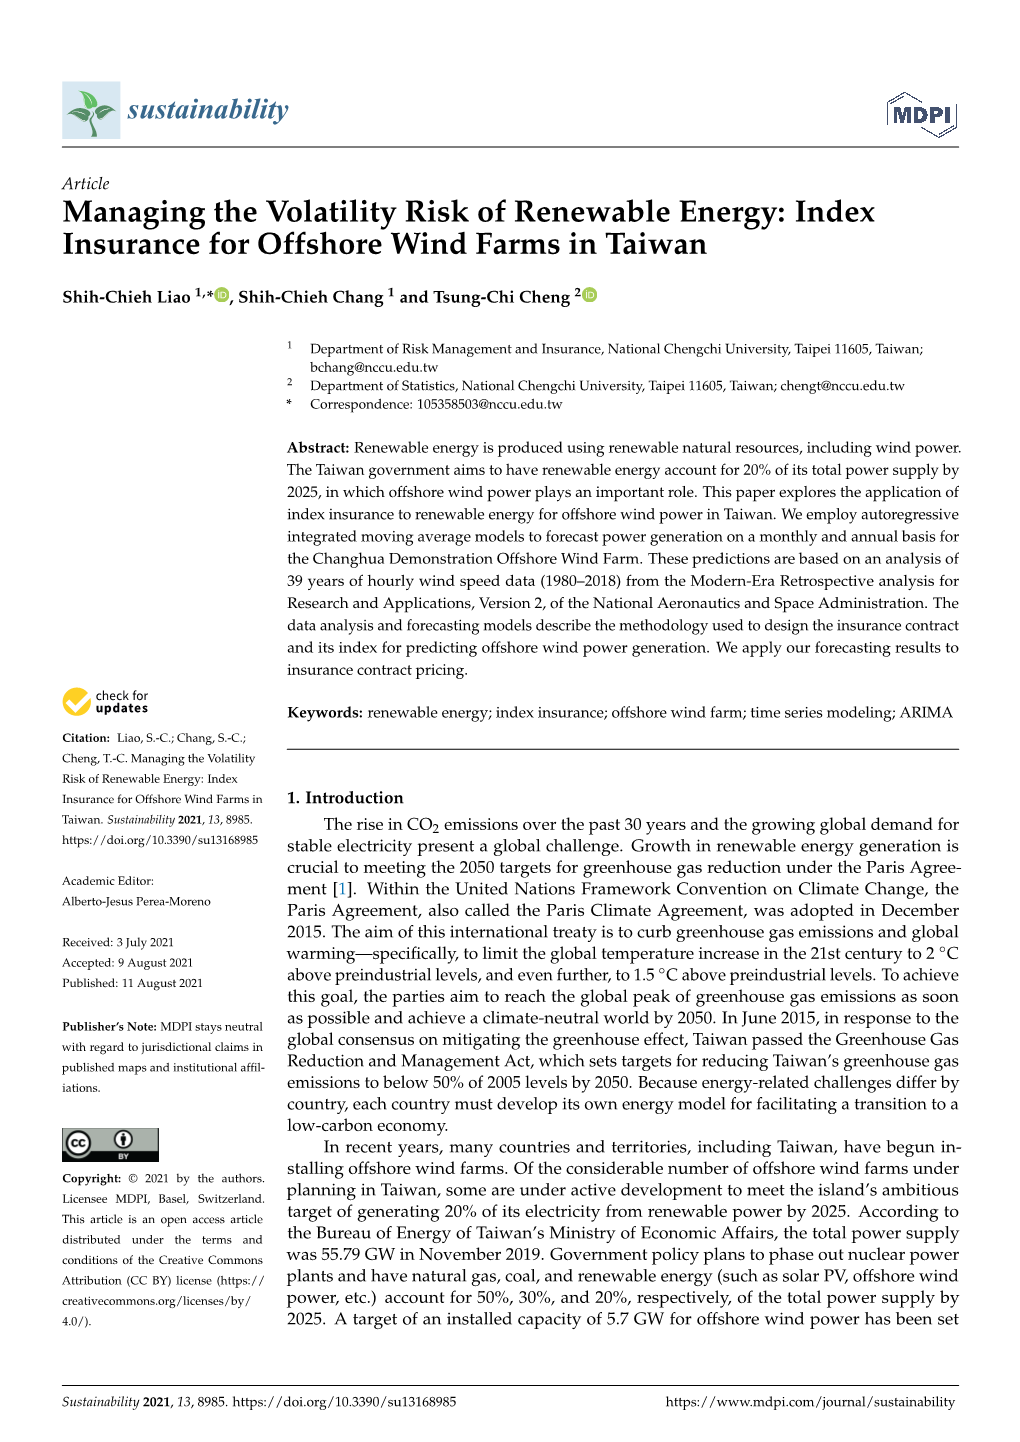 Insurance for Offshore Wind Farms in Taiwan